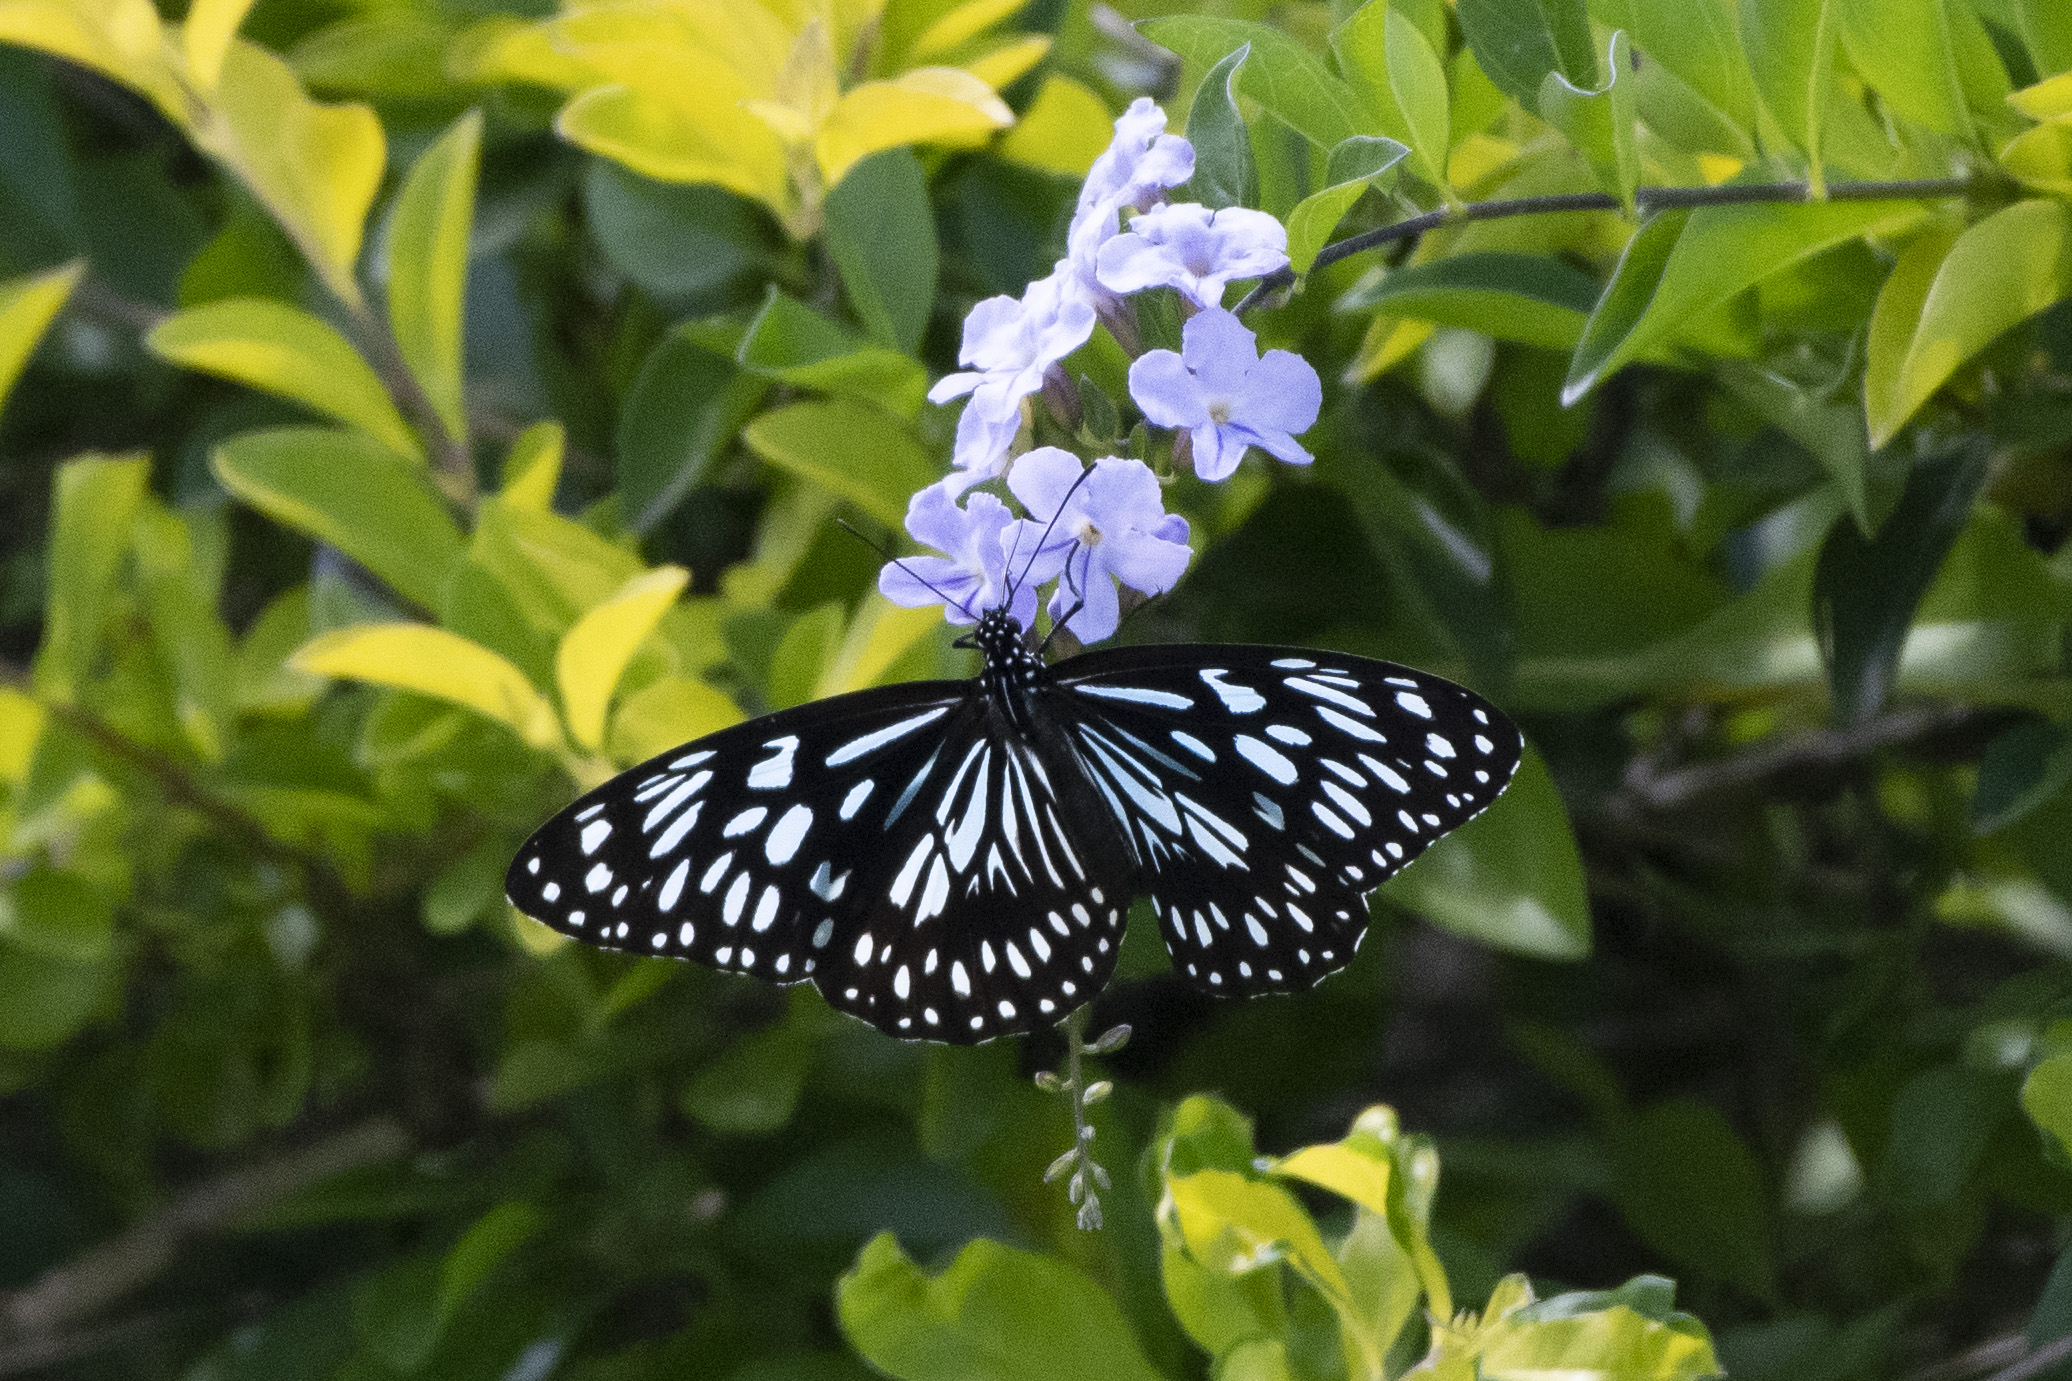 A Blue Spotted Butterfly